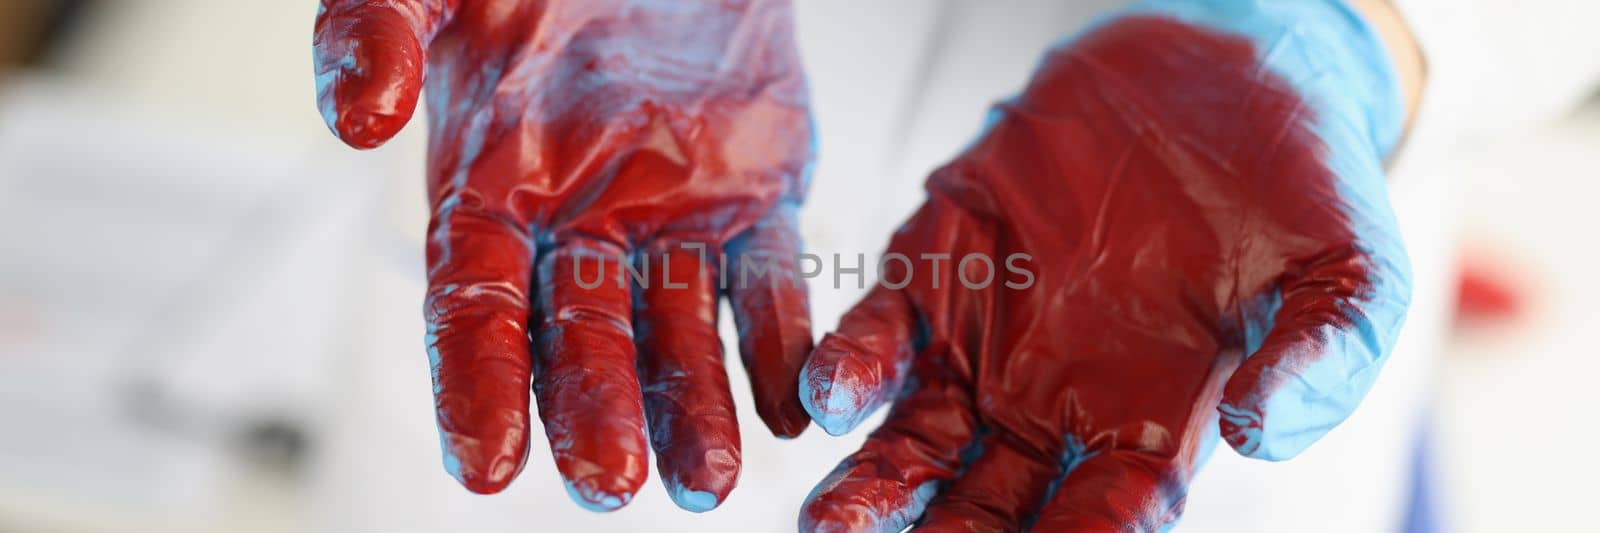 Surgeon in blue gloves with blood. Evaluation of severity of blood loss in surgical practice concept